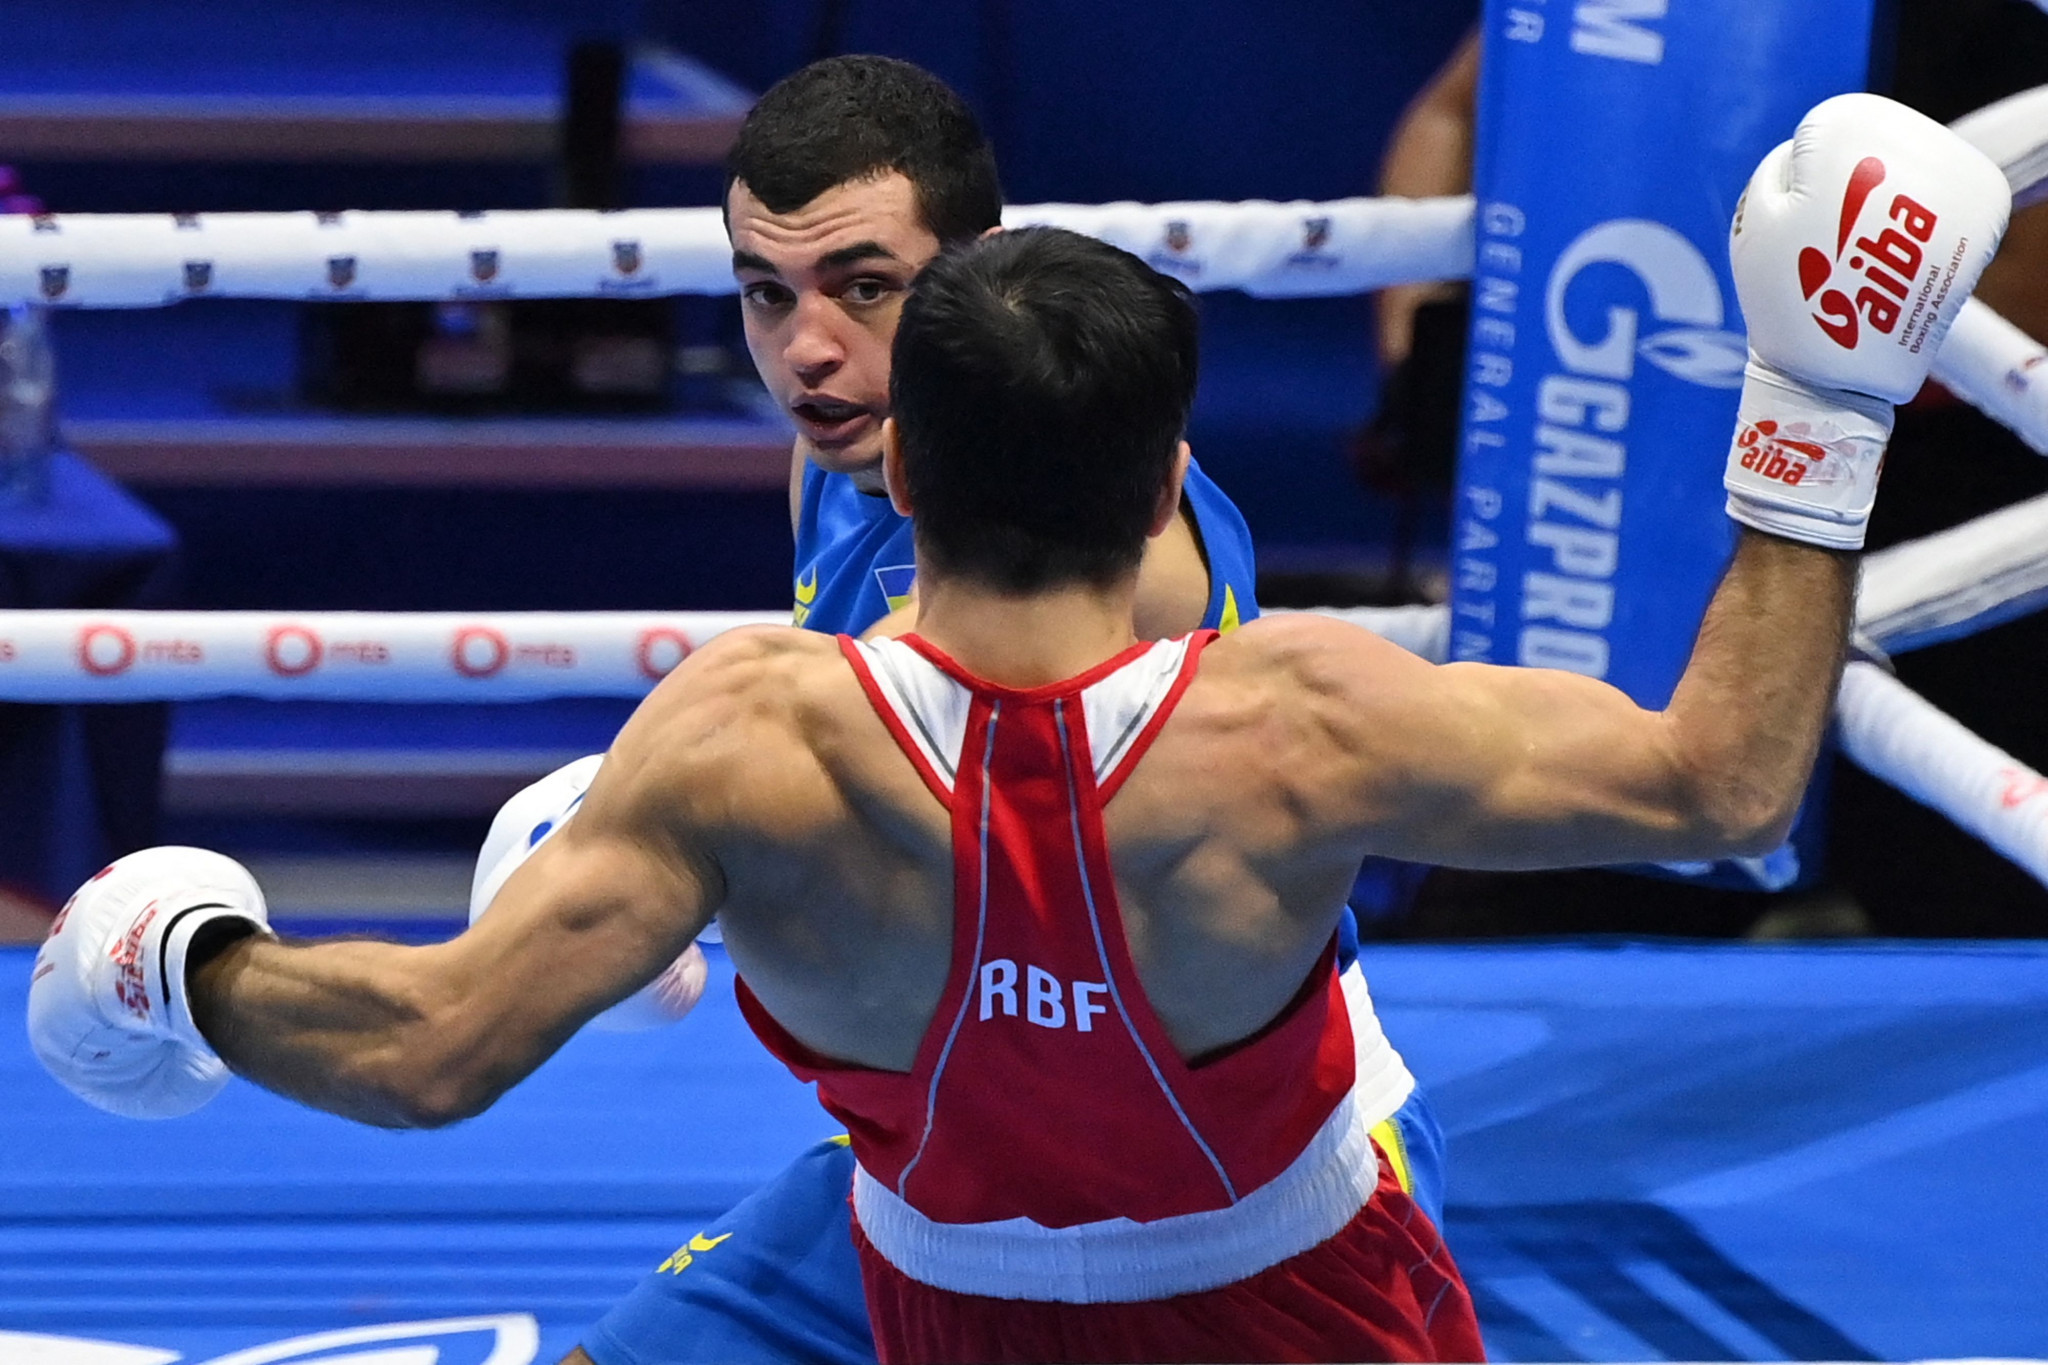 Russian Boxing Federation appeals to CAS over athlete and event bans